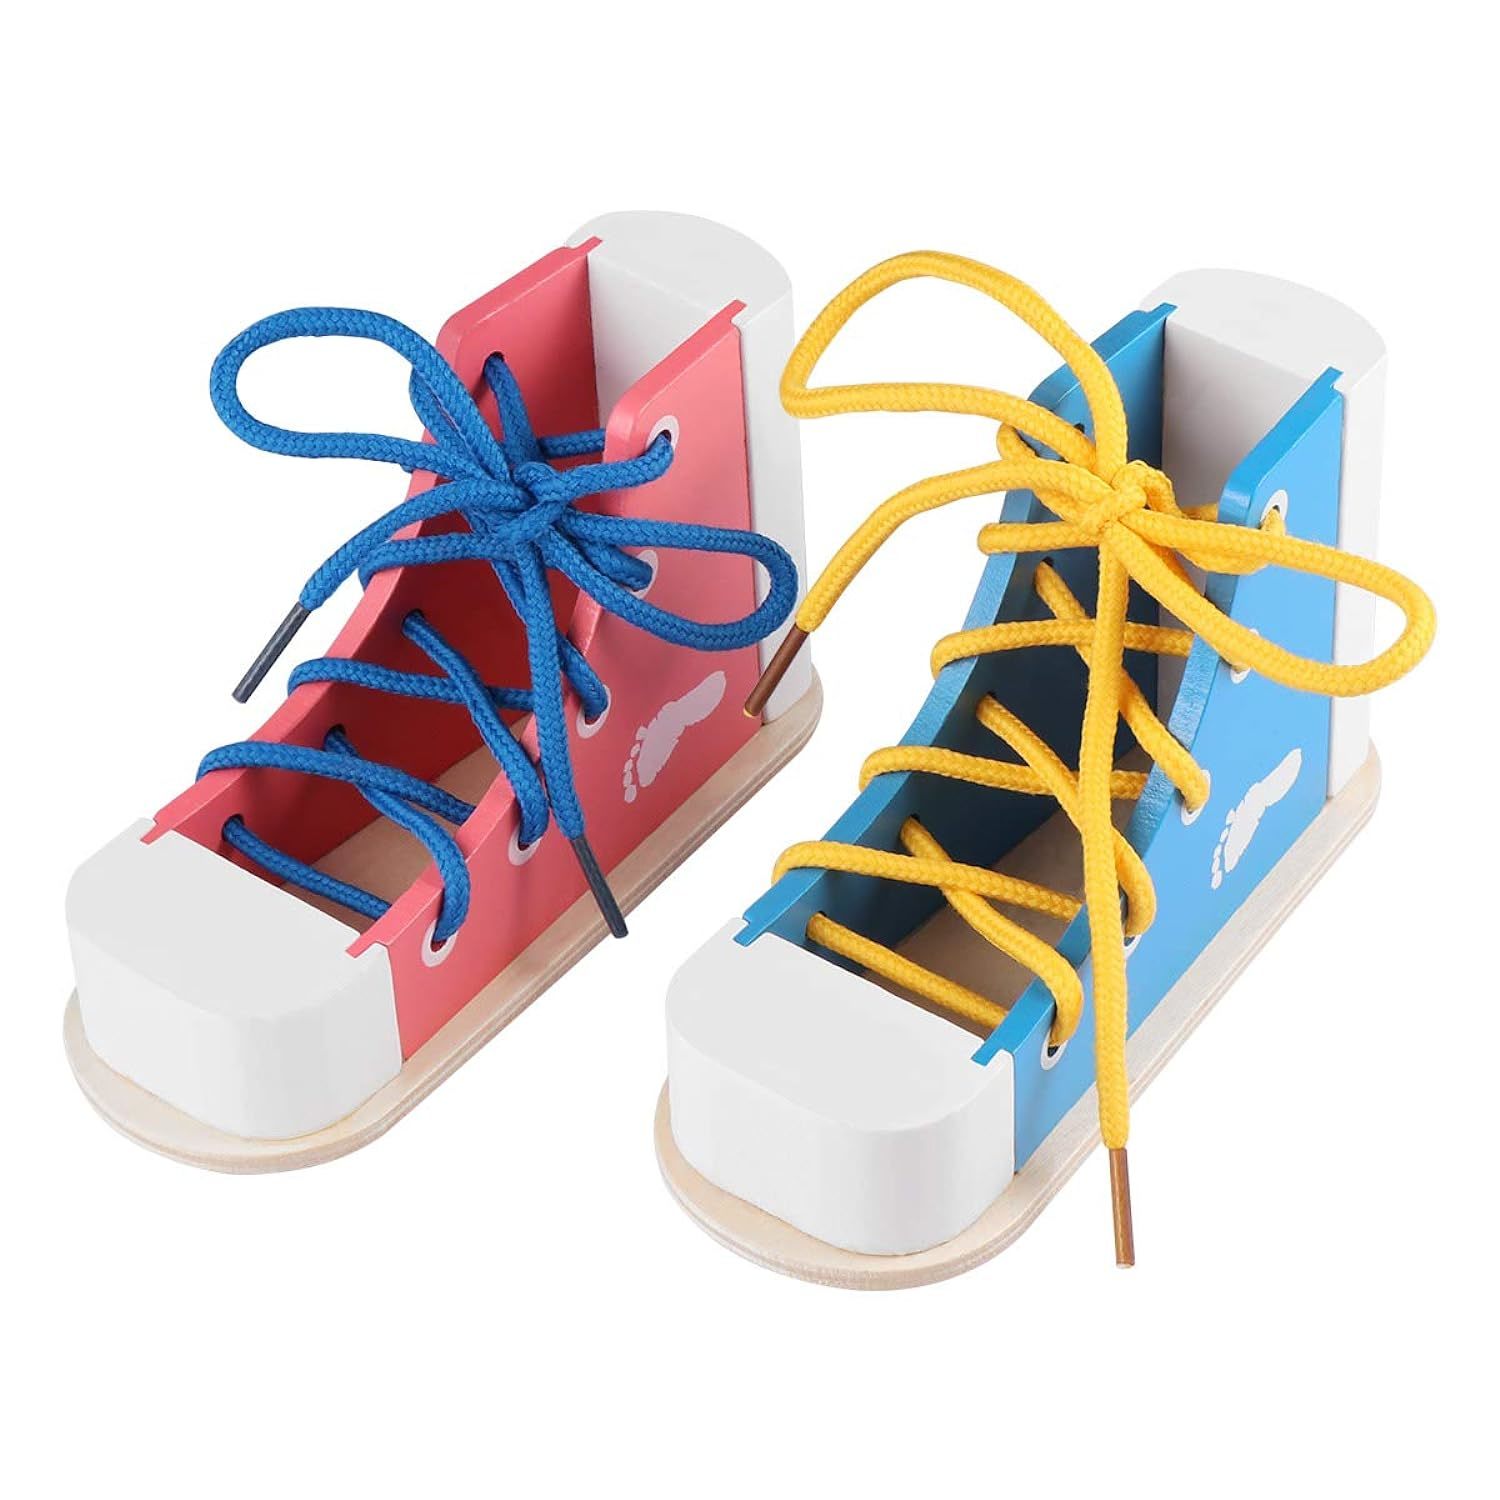 Primary image for Wooden Lacing Shoe Toy Learn To Tie Shoelaces Shoes Tying Teaching Kit For Kids,